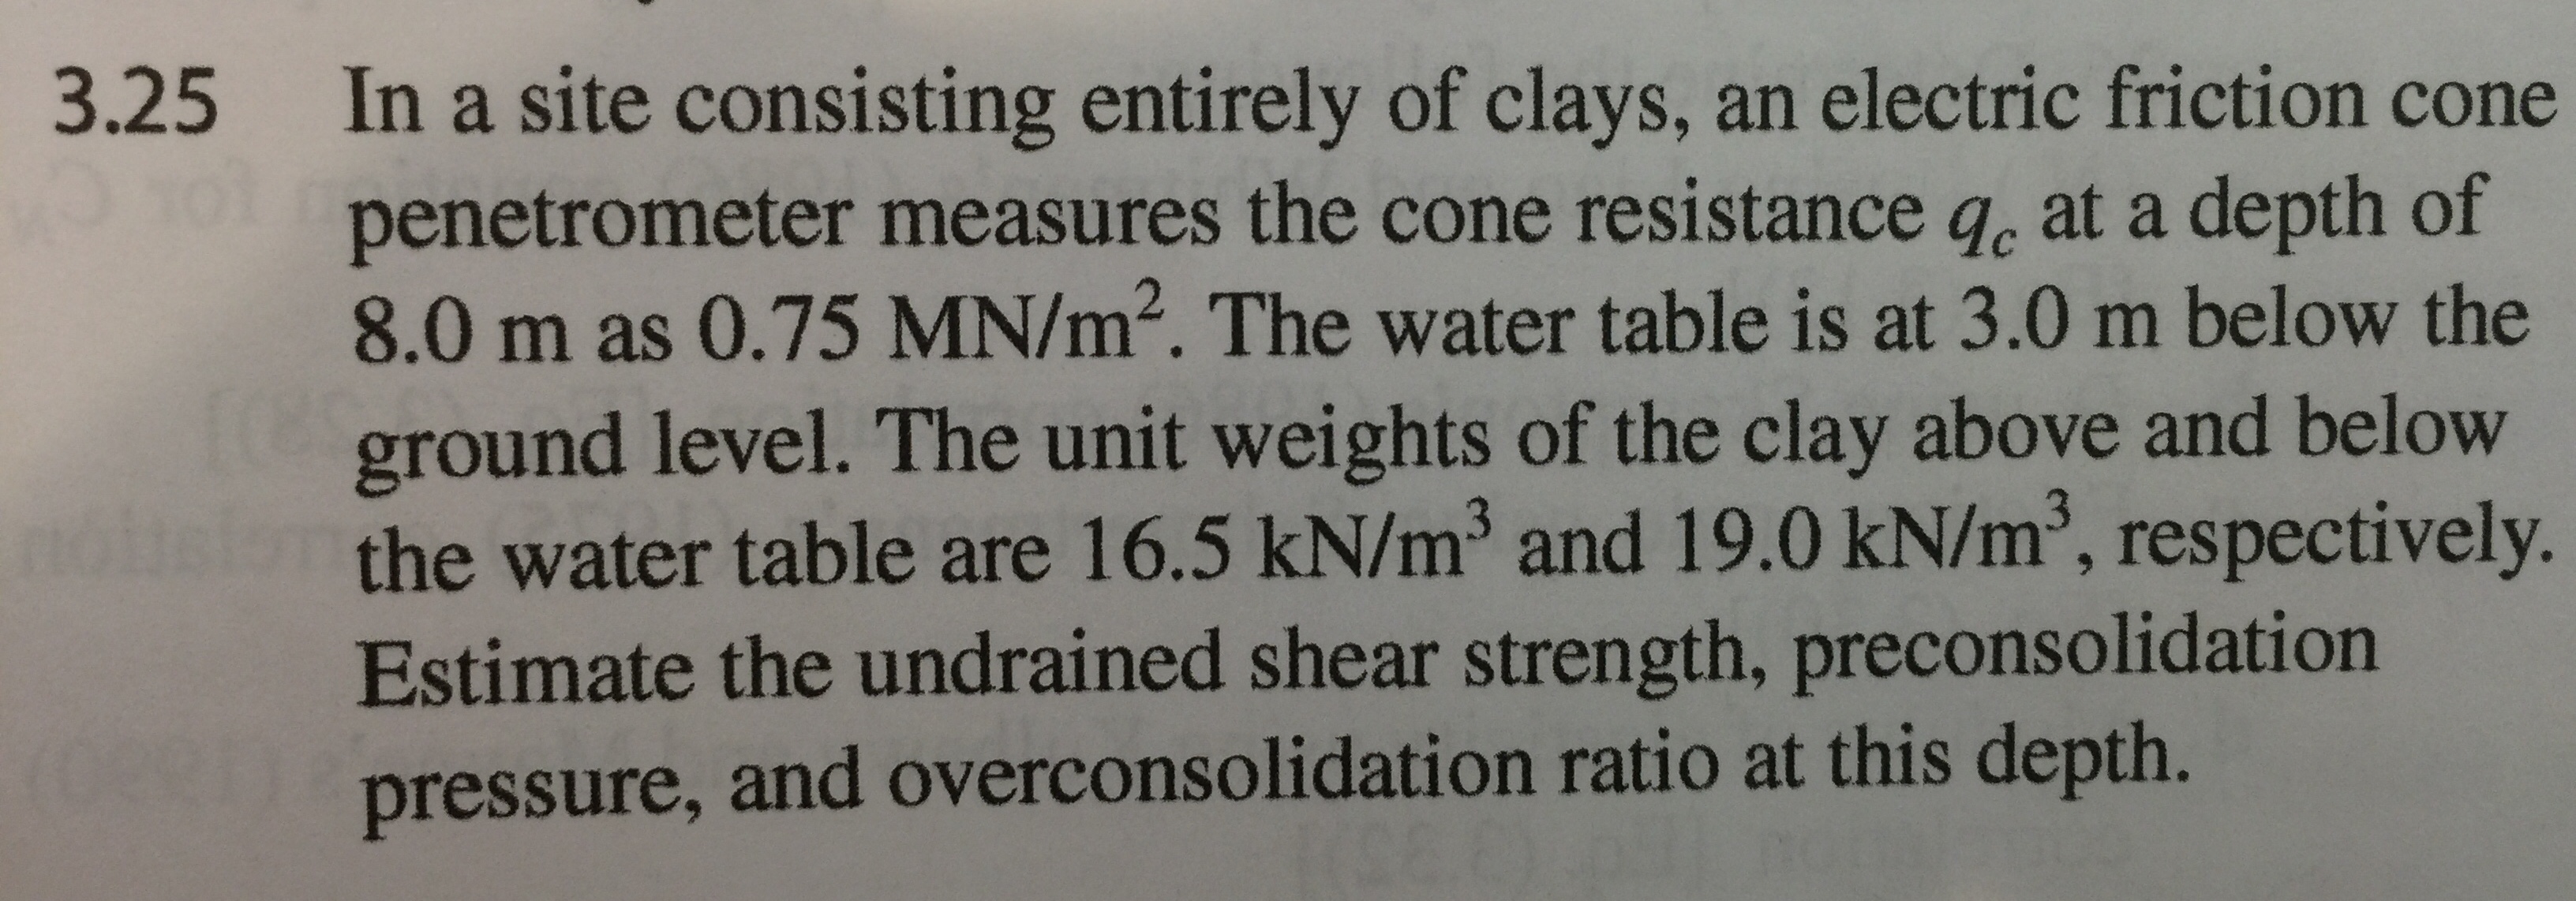 3.25 In a site consisting entirely of clays, an electric friction cone
penetrometer measures the cone resistance q, at a depth of
8.0 m as 0.75 MN/m2. The water table is at 3.0 m below the
ground level. The unit weights of the clay above and below
the water table are 16.5 kN/m3 and 19.0 kN/m2, respectively.
Estimate the undrained shear strength, preconsolidation
pressure, and overconsolidation ratio at this depth.
